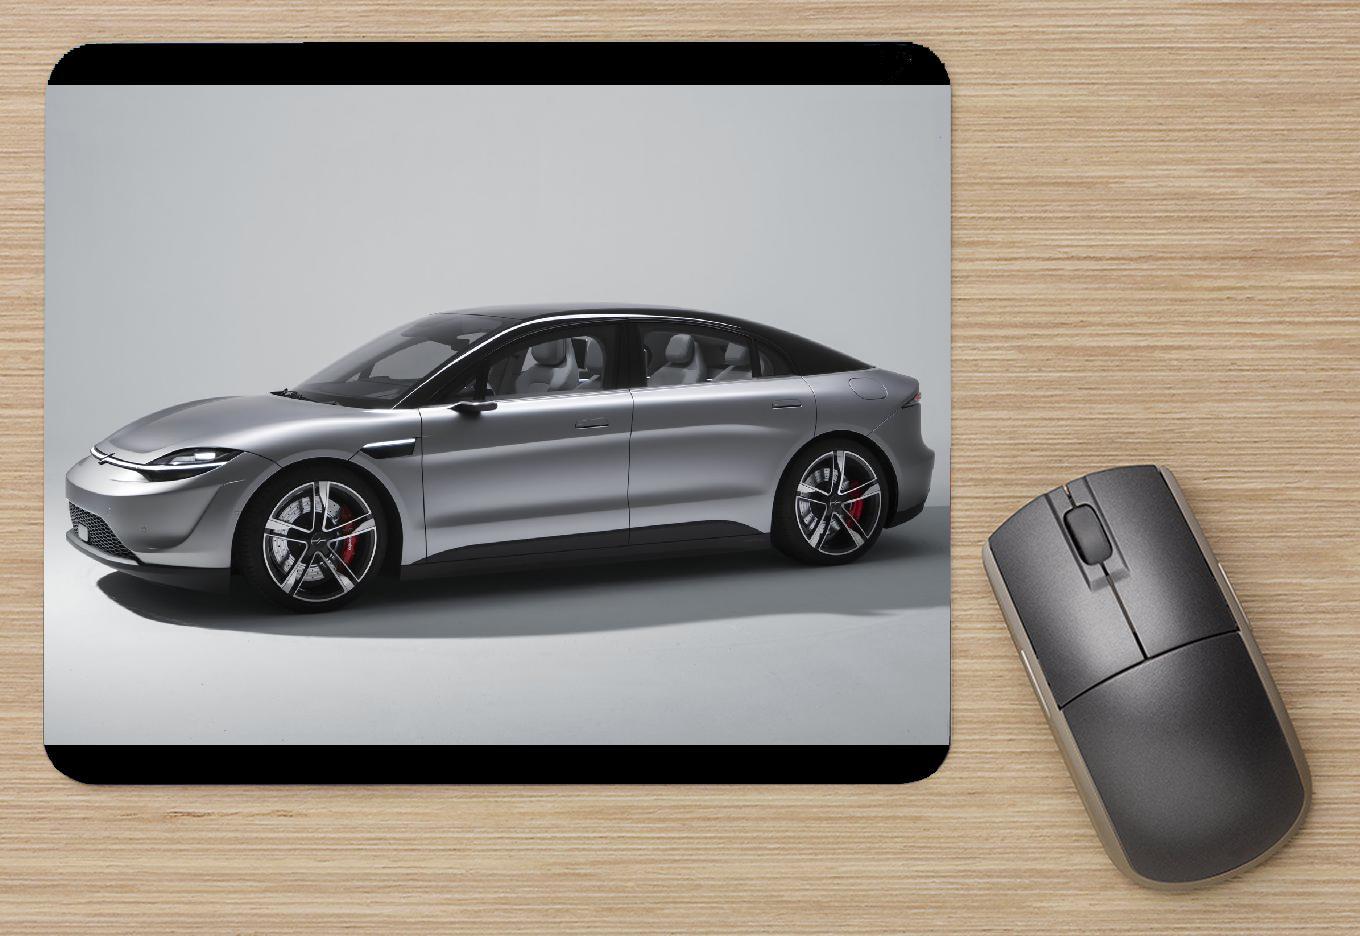 Primary image for Sony Vision-S Concept 2020 Mouse Pad #CRM-1395554